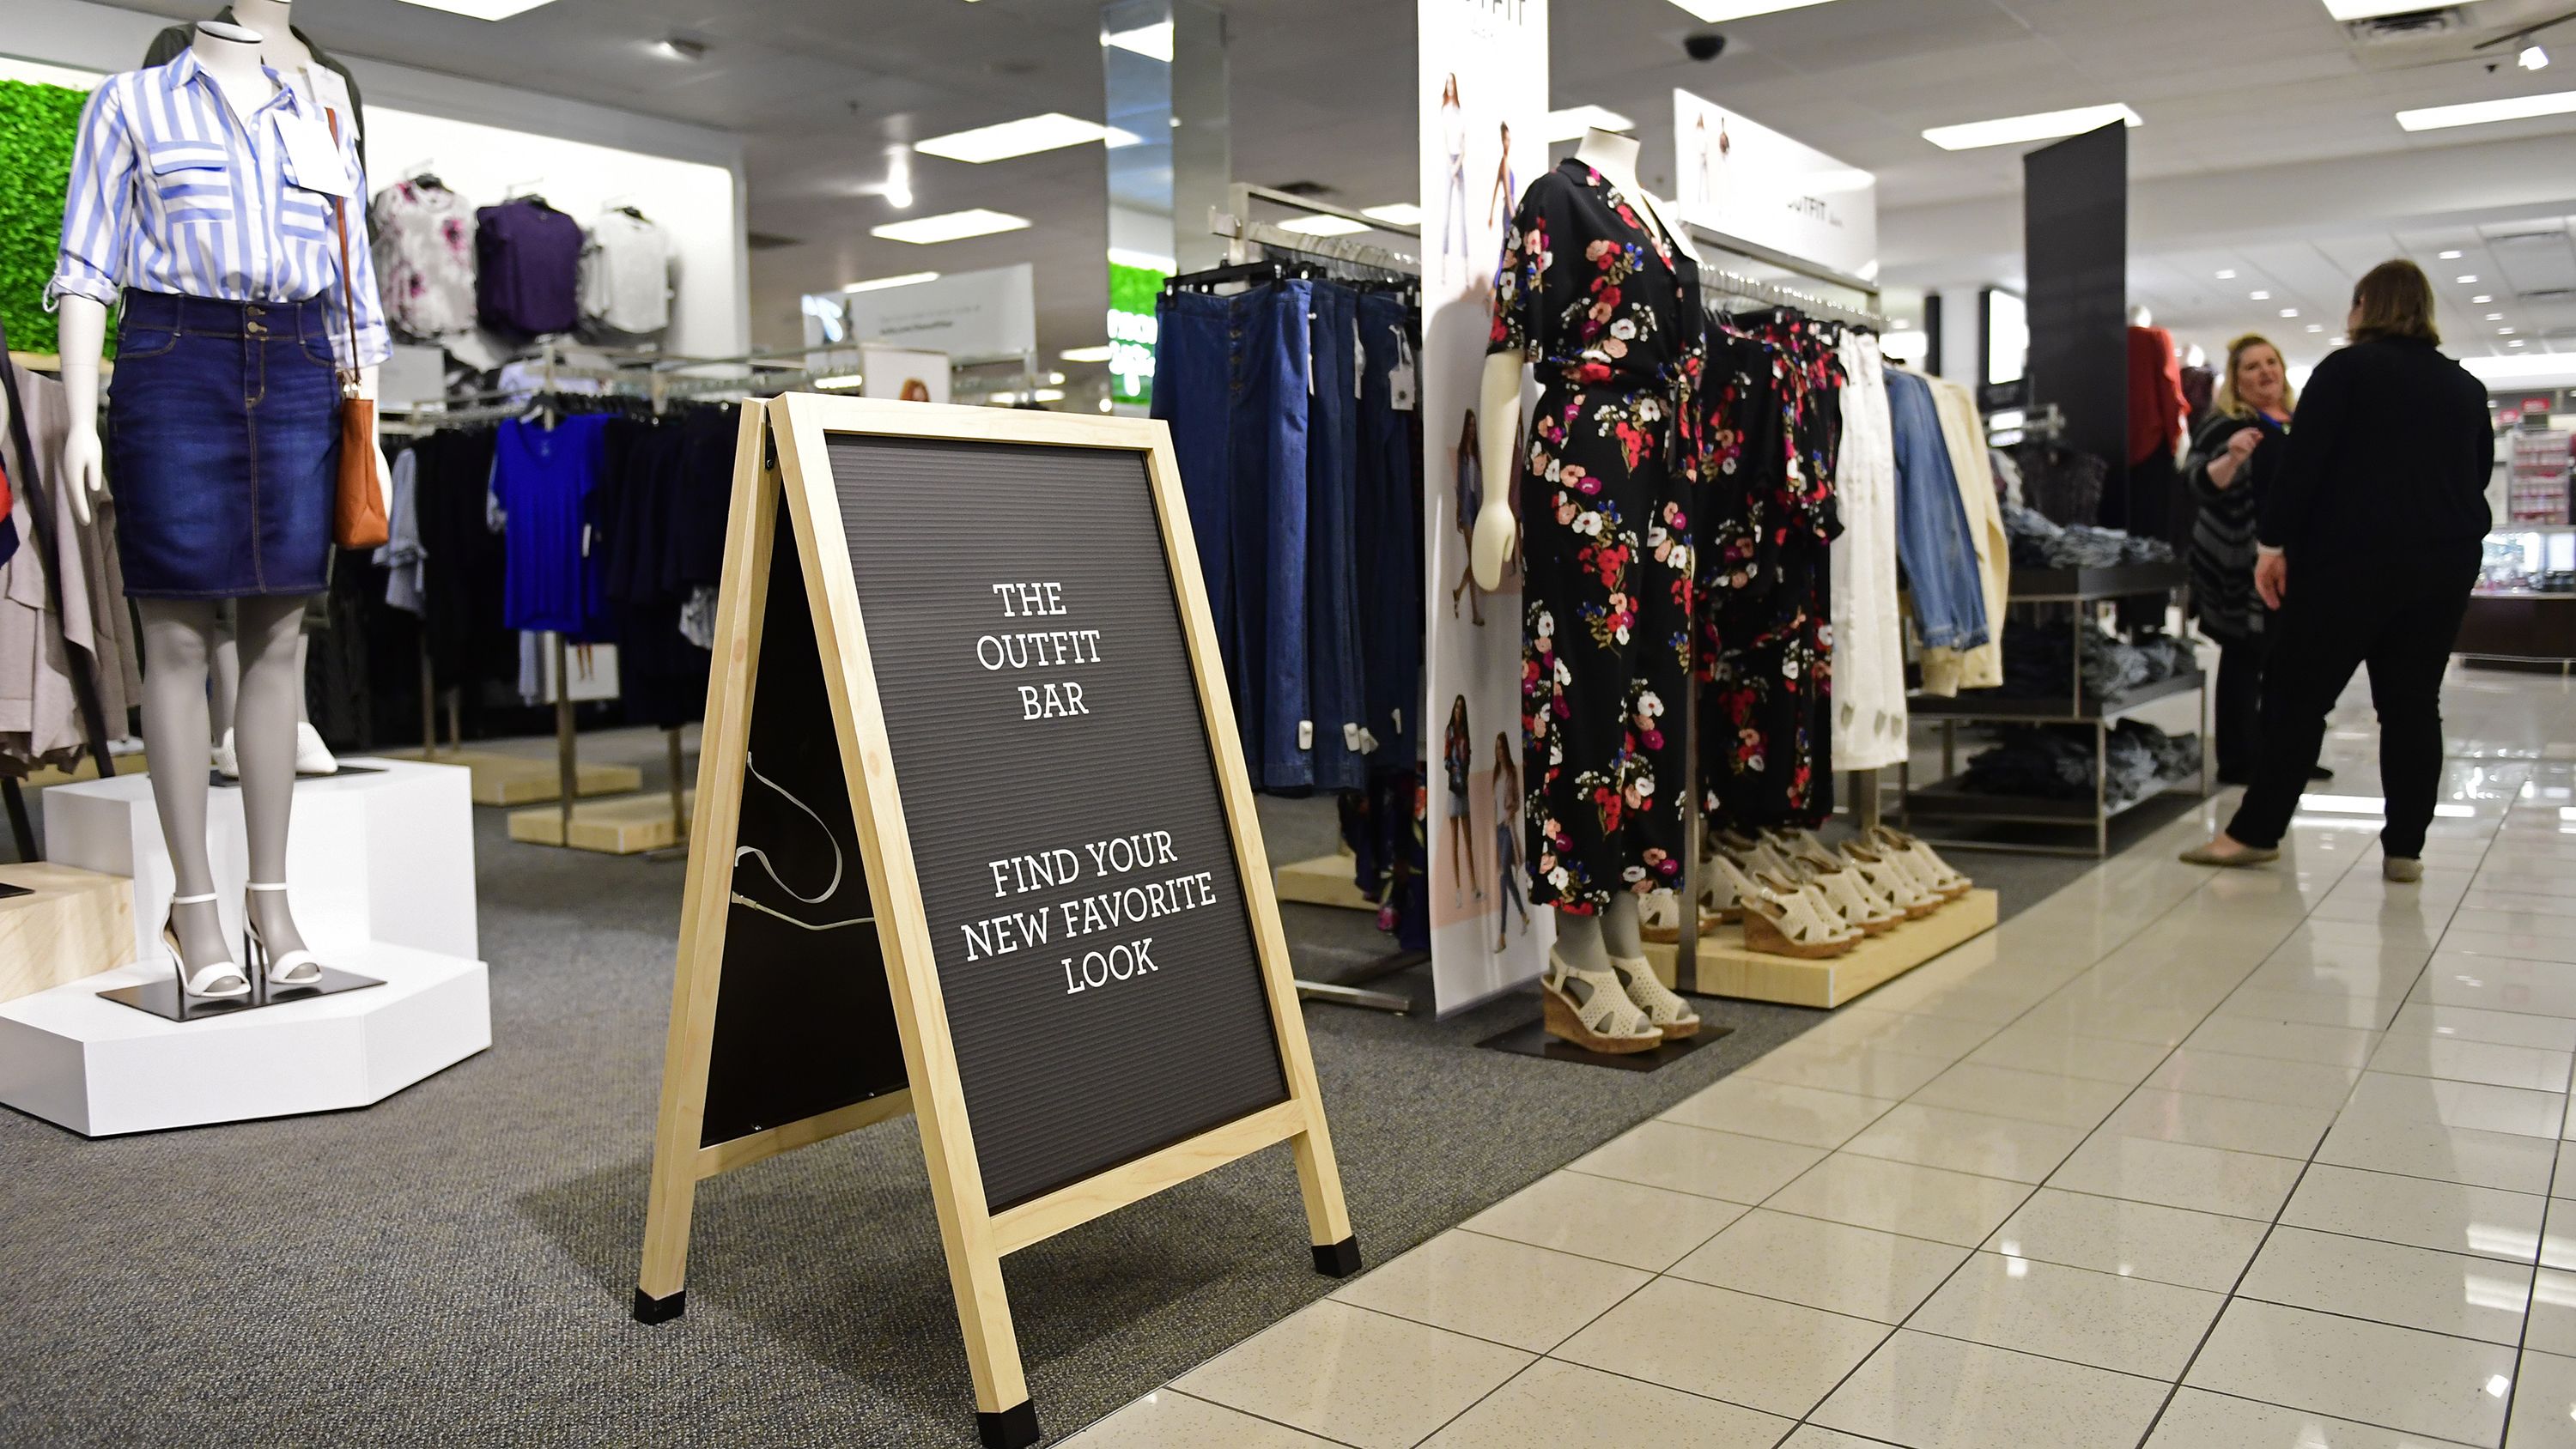 Kohl's faces shopper uproar after becoming latest retailer to